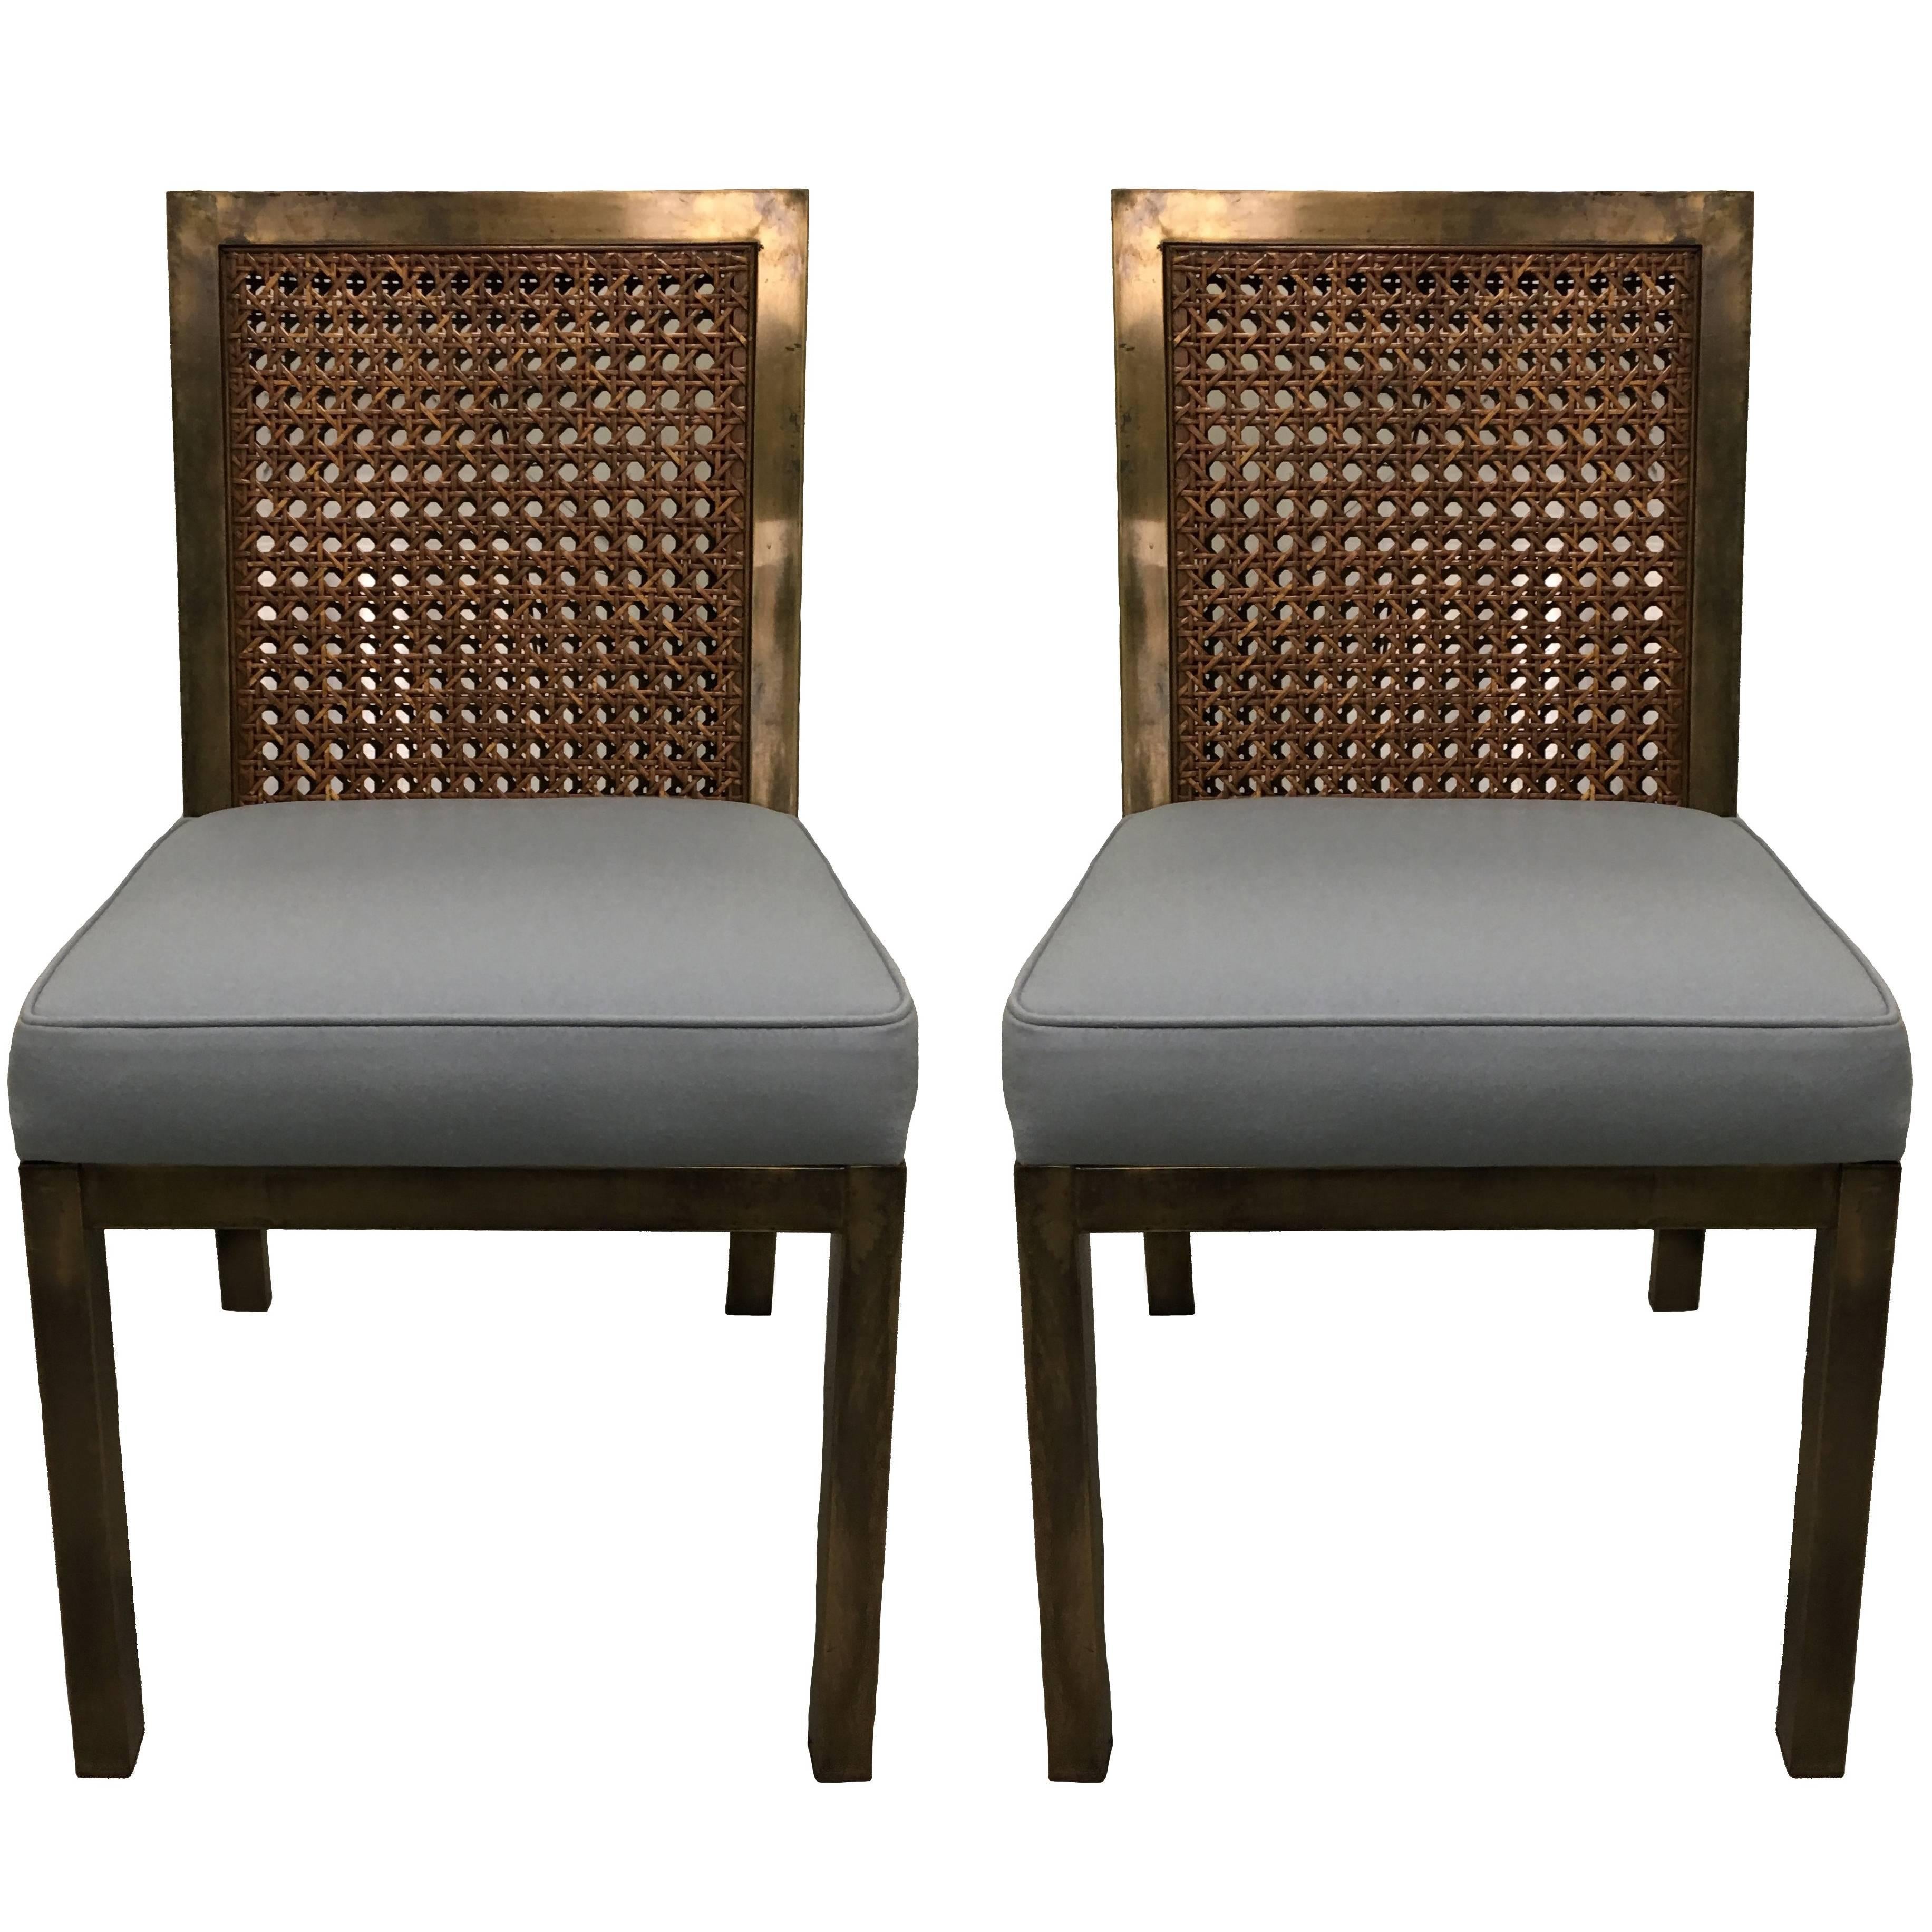 Pair of 1970s Brass & Cane Parsons Side Chairs by Widdicomb